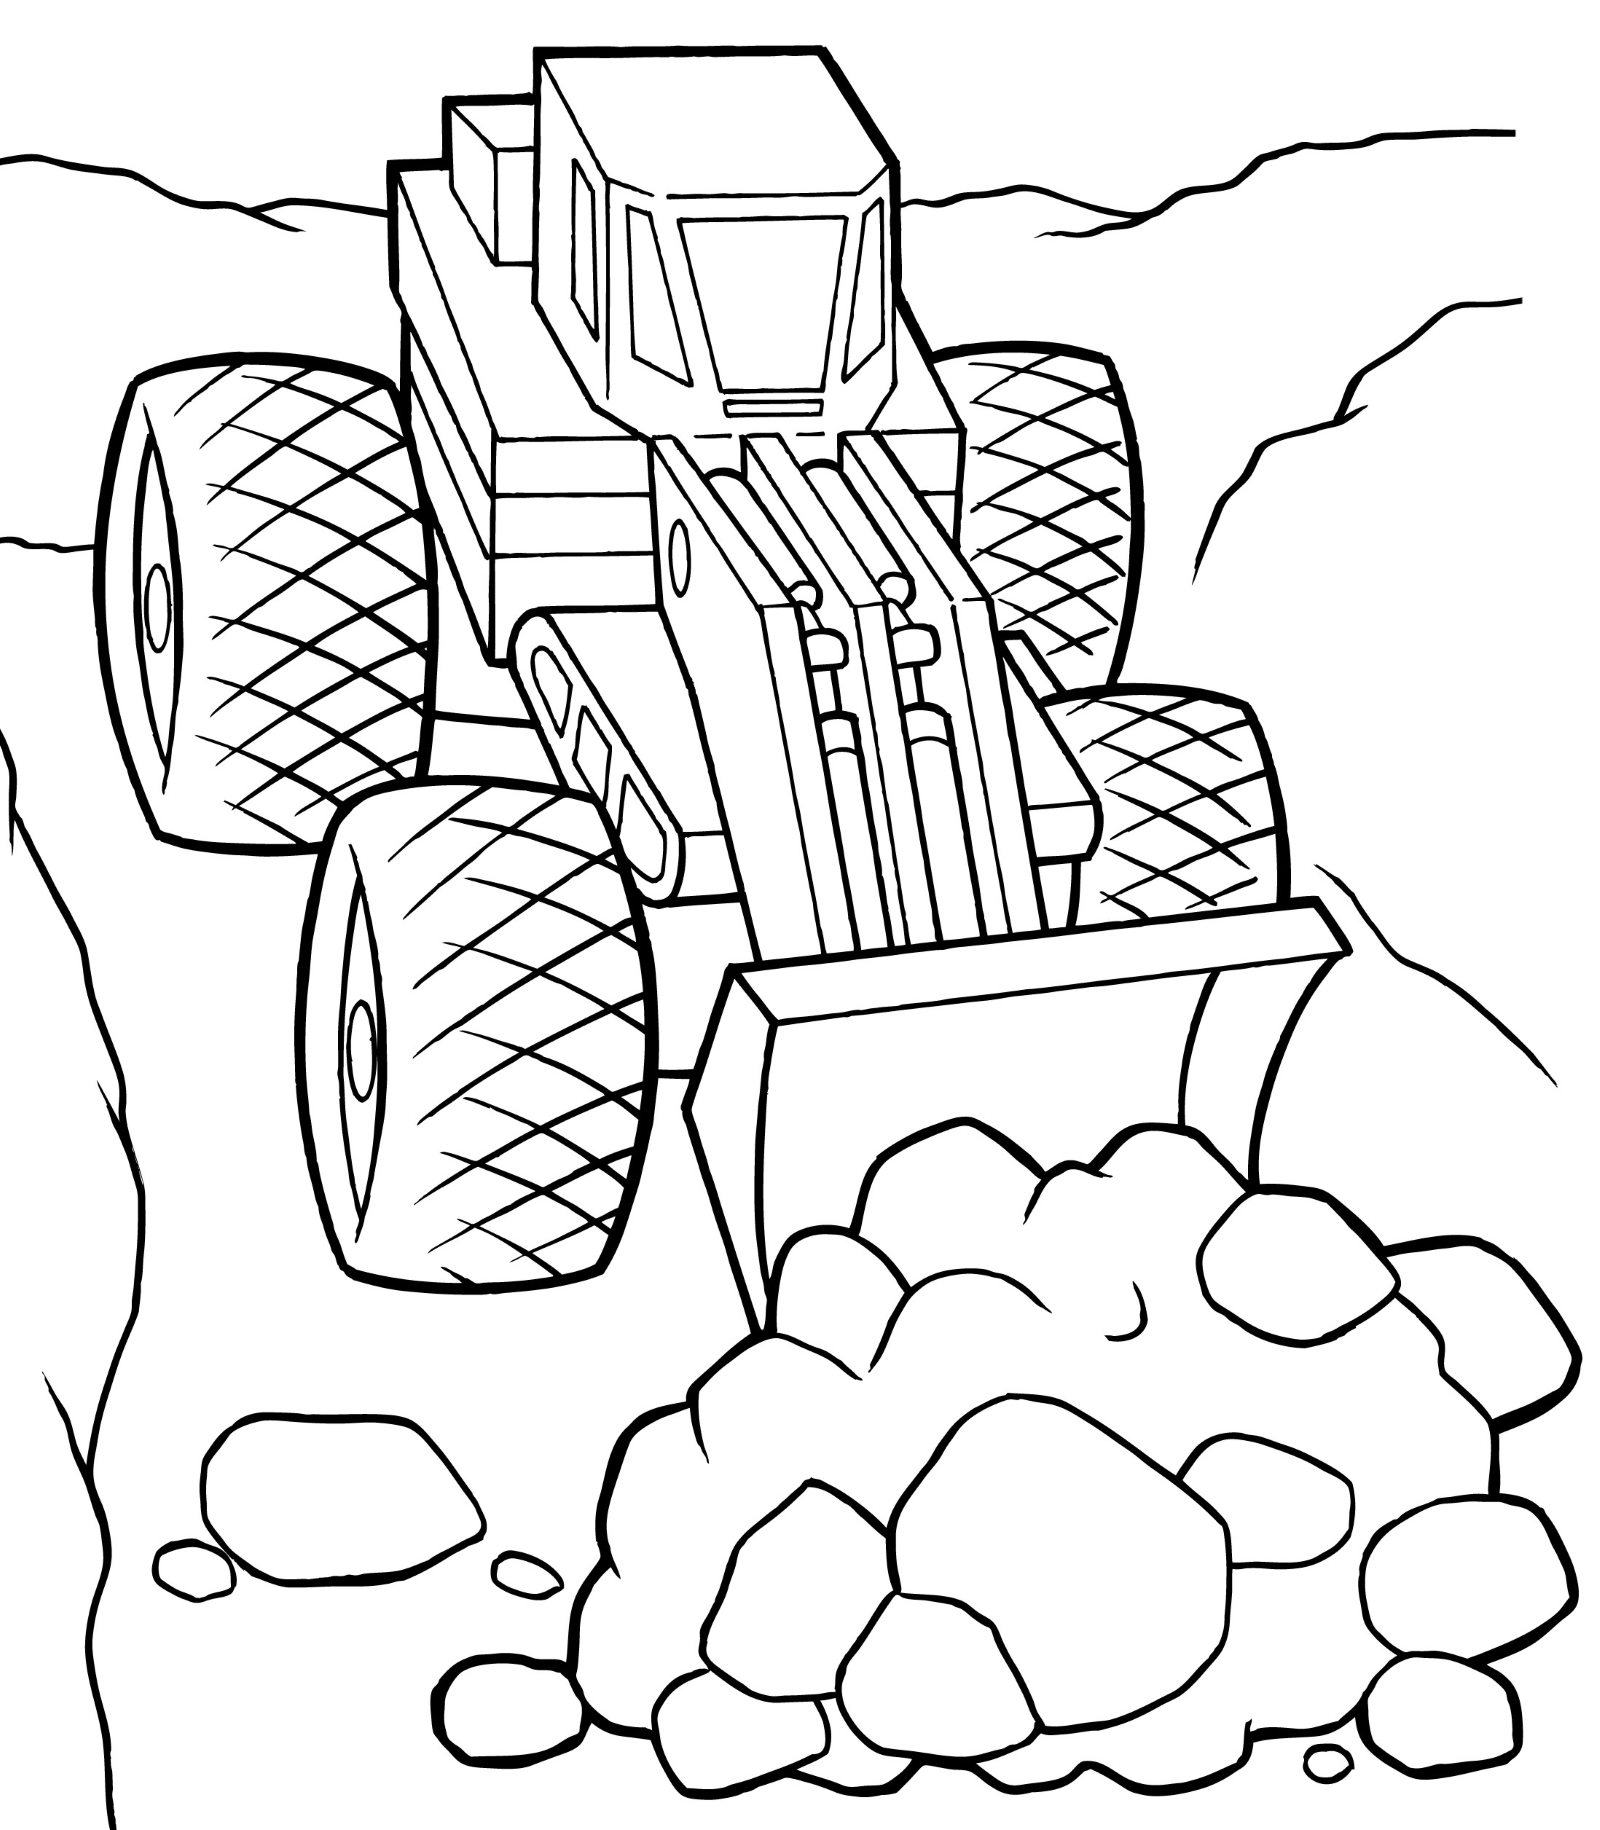  Bulldozer  coloring  pages  to download and print  for free